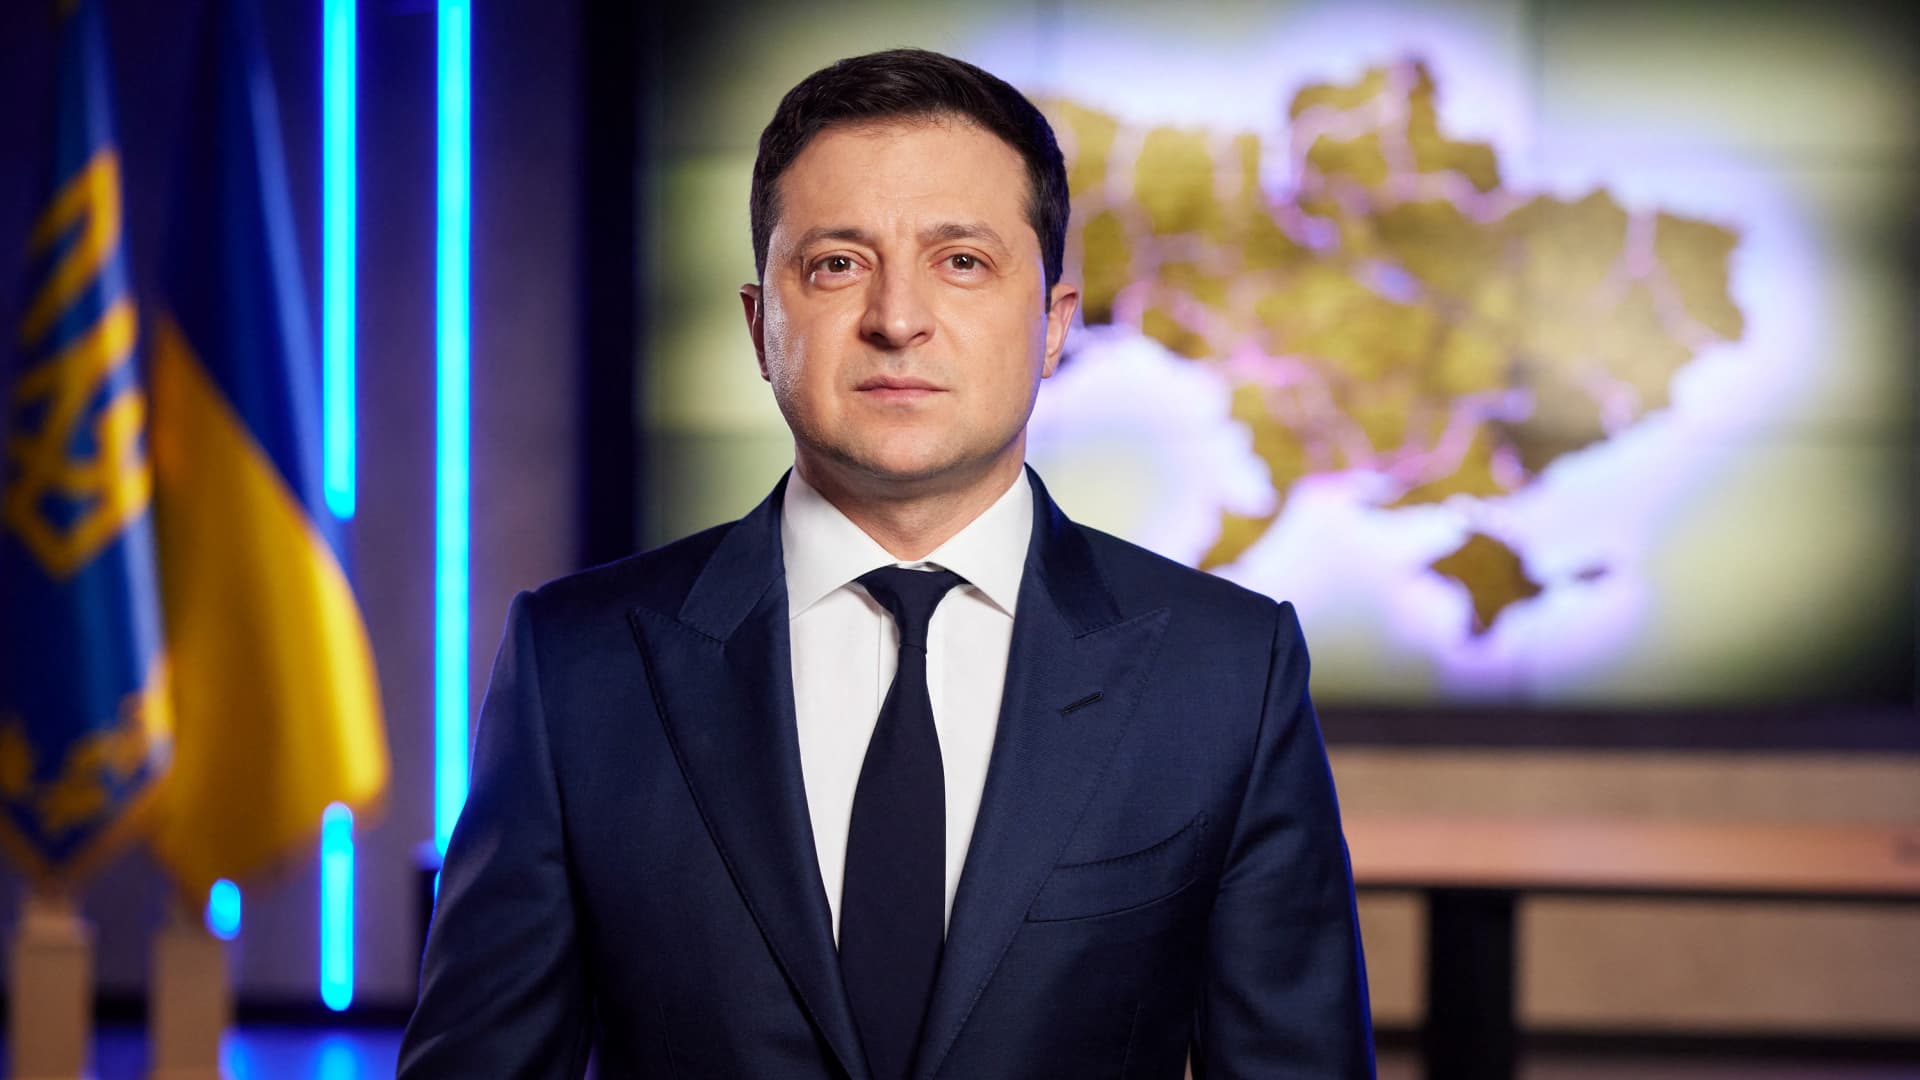 Ukrainian President Volodymyr Zelenskiy addresses the nation after a meeting of the Security and Defense Council after Russia's decision to formally recognize two Moscow-backed regions of eastern Ukraine as independent, in Kyiv, Ukraine, February 22, 2022.